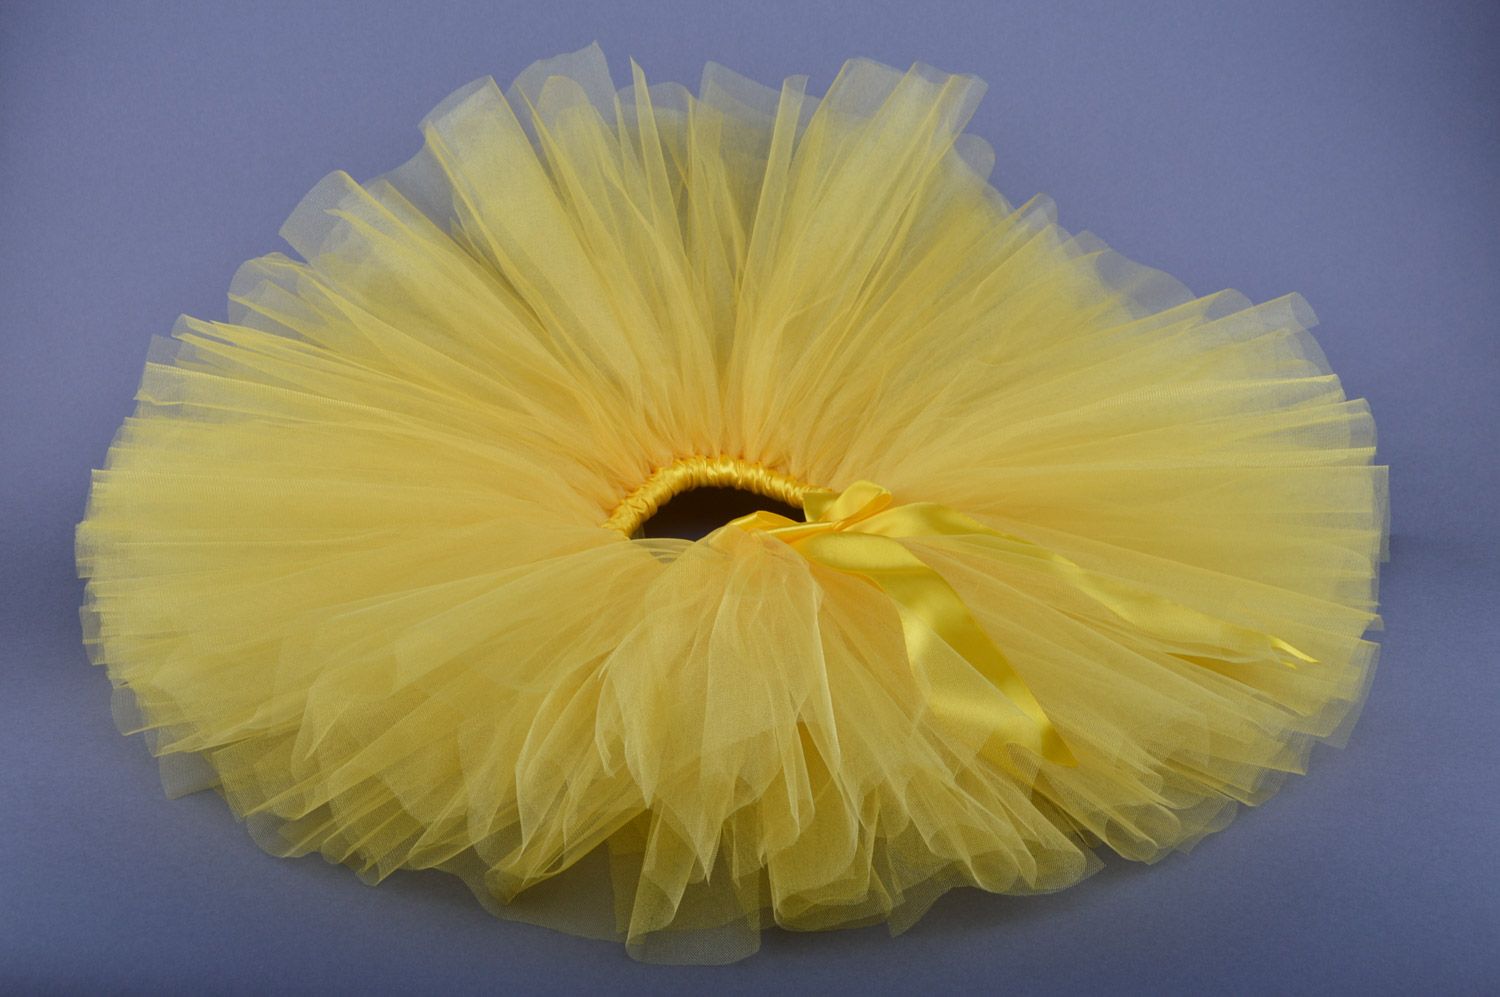 Handmade ballet tutu skirt sewn of bright yellow tulle and ribbons for children photo 1